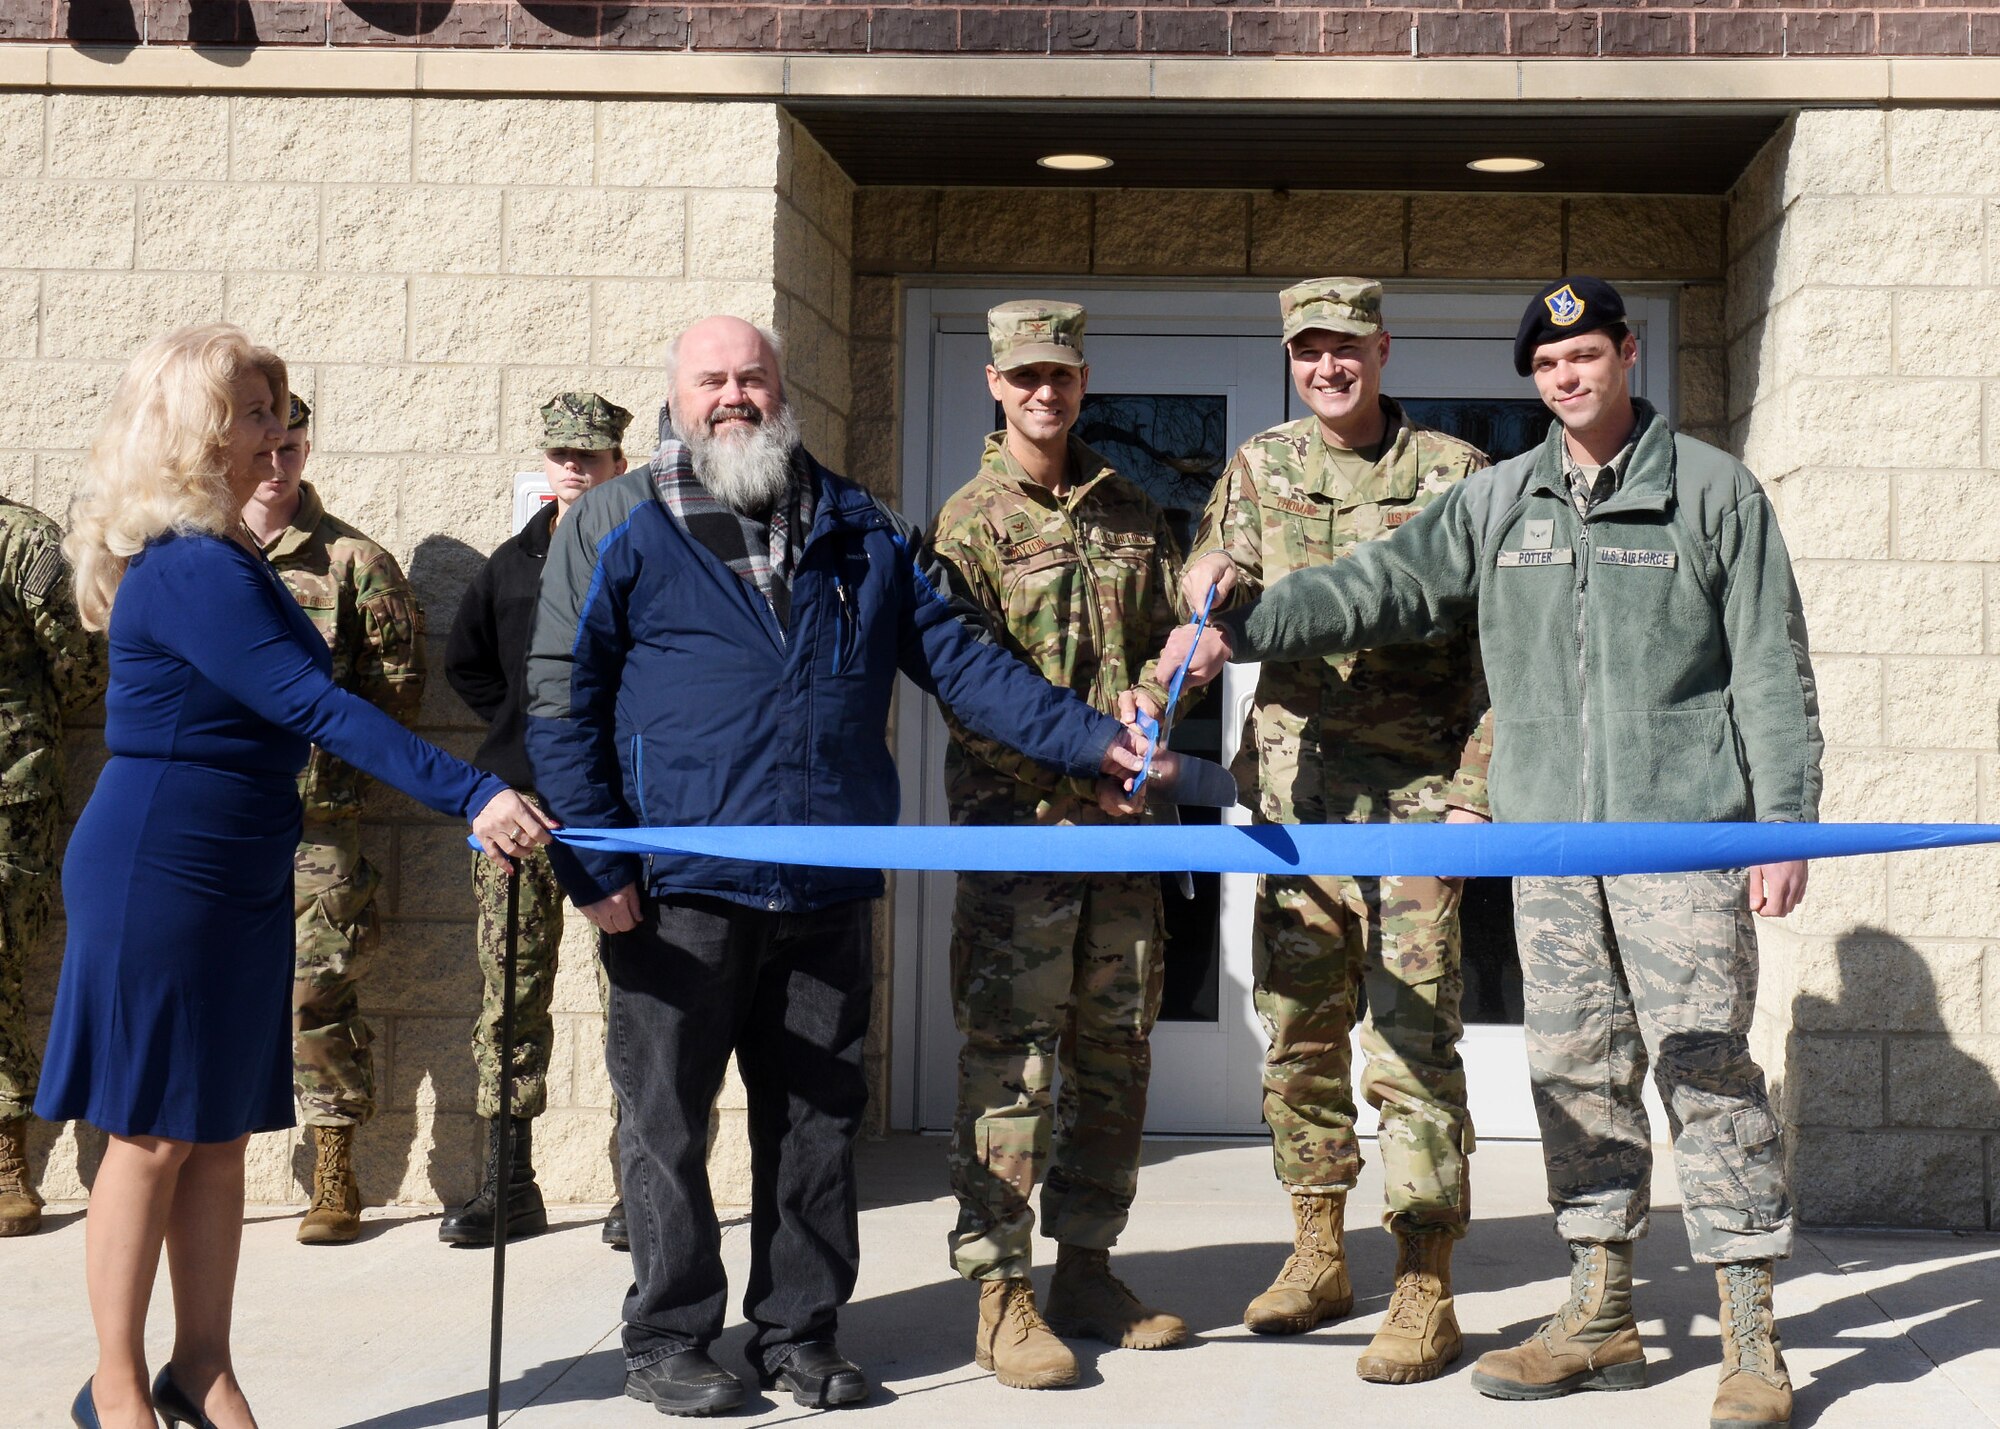 From left to right: Doug Shapland, 55th Civil Engineer Squadron project manager, Col. William Dayton, 55th Mission Support Group commander, Chief Master Sgt. Brian Thomas, 55th Wing command chief and Airman 1st Class Shane Potter, 55th Security Forces Squadron patrolman, cut a ribbon to mark the opening of Cobb Hall, the installation’s newest dormitory, Nov. 7, 2019. The new 51,000 square foot, three-floor dormitory includes 30 module suites that can accommodate 120 Airmen. The new $18.8 million dormitory is named in honor of retired Chief Master Sgt. Lawrence A. Cobb.